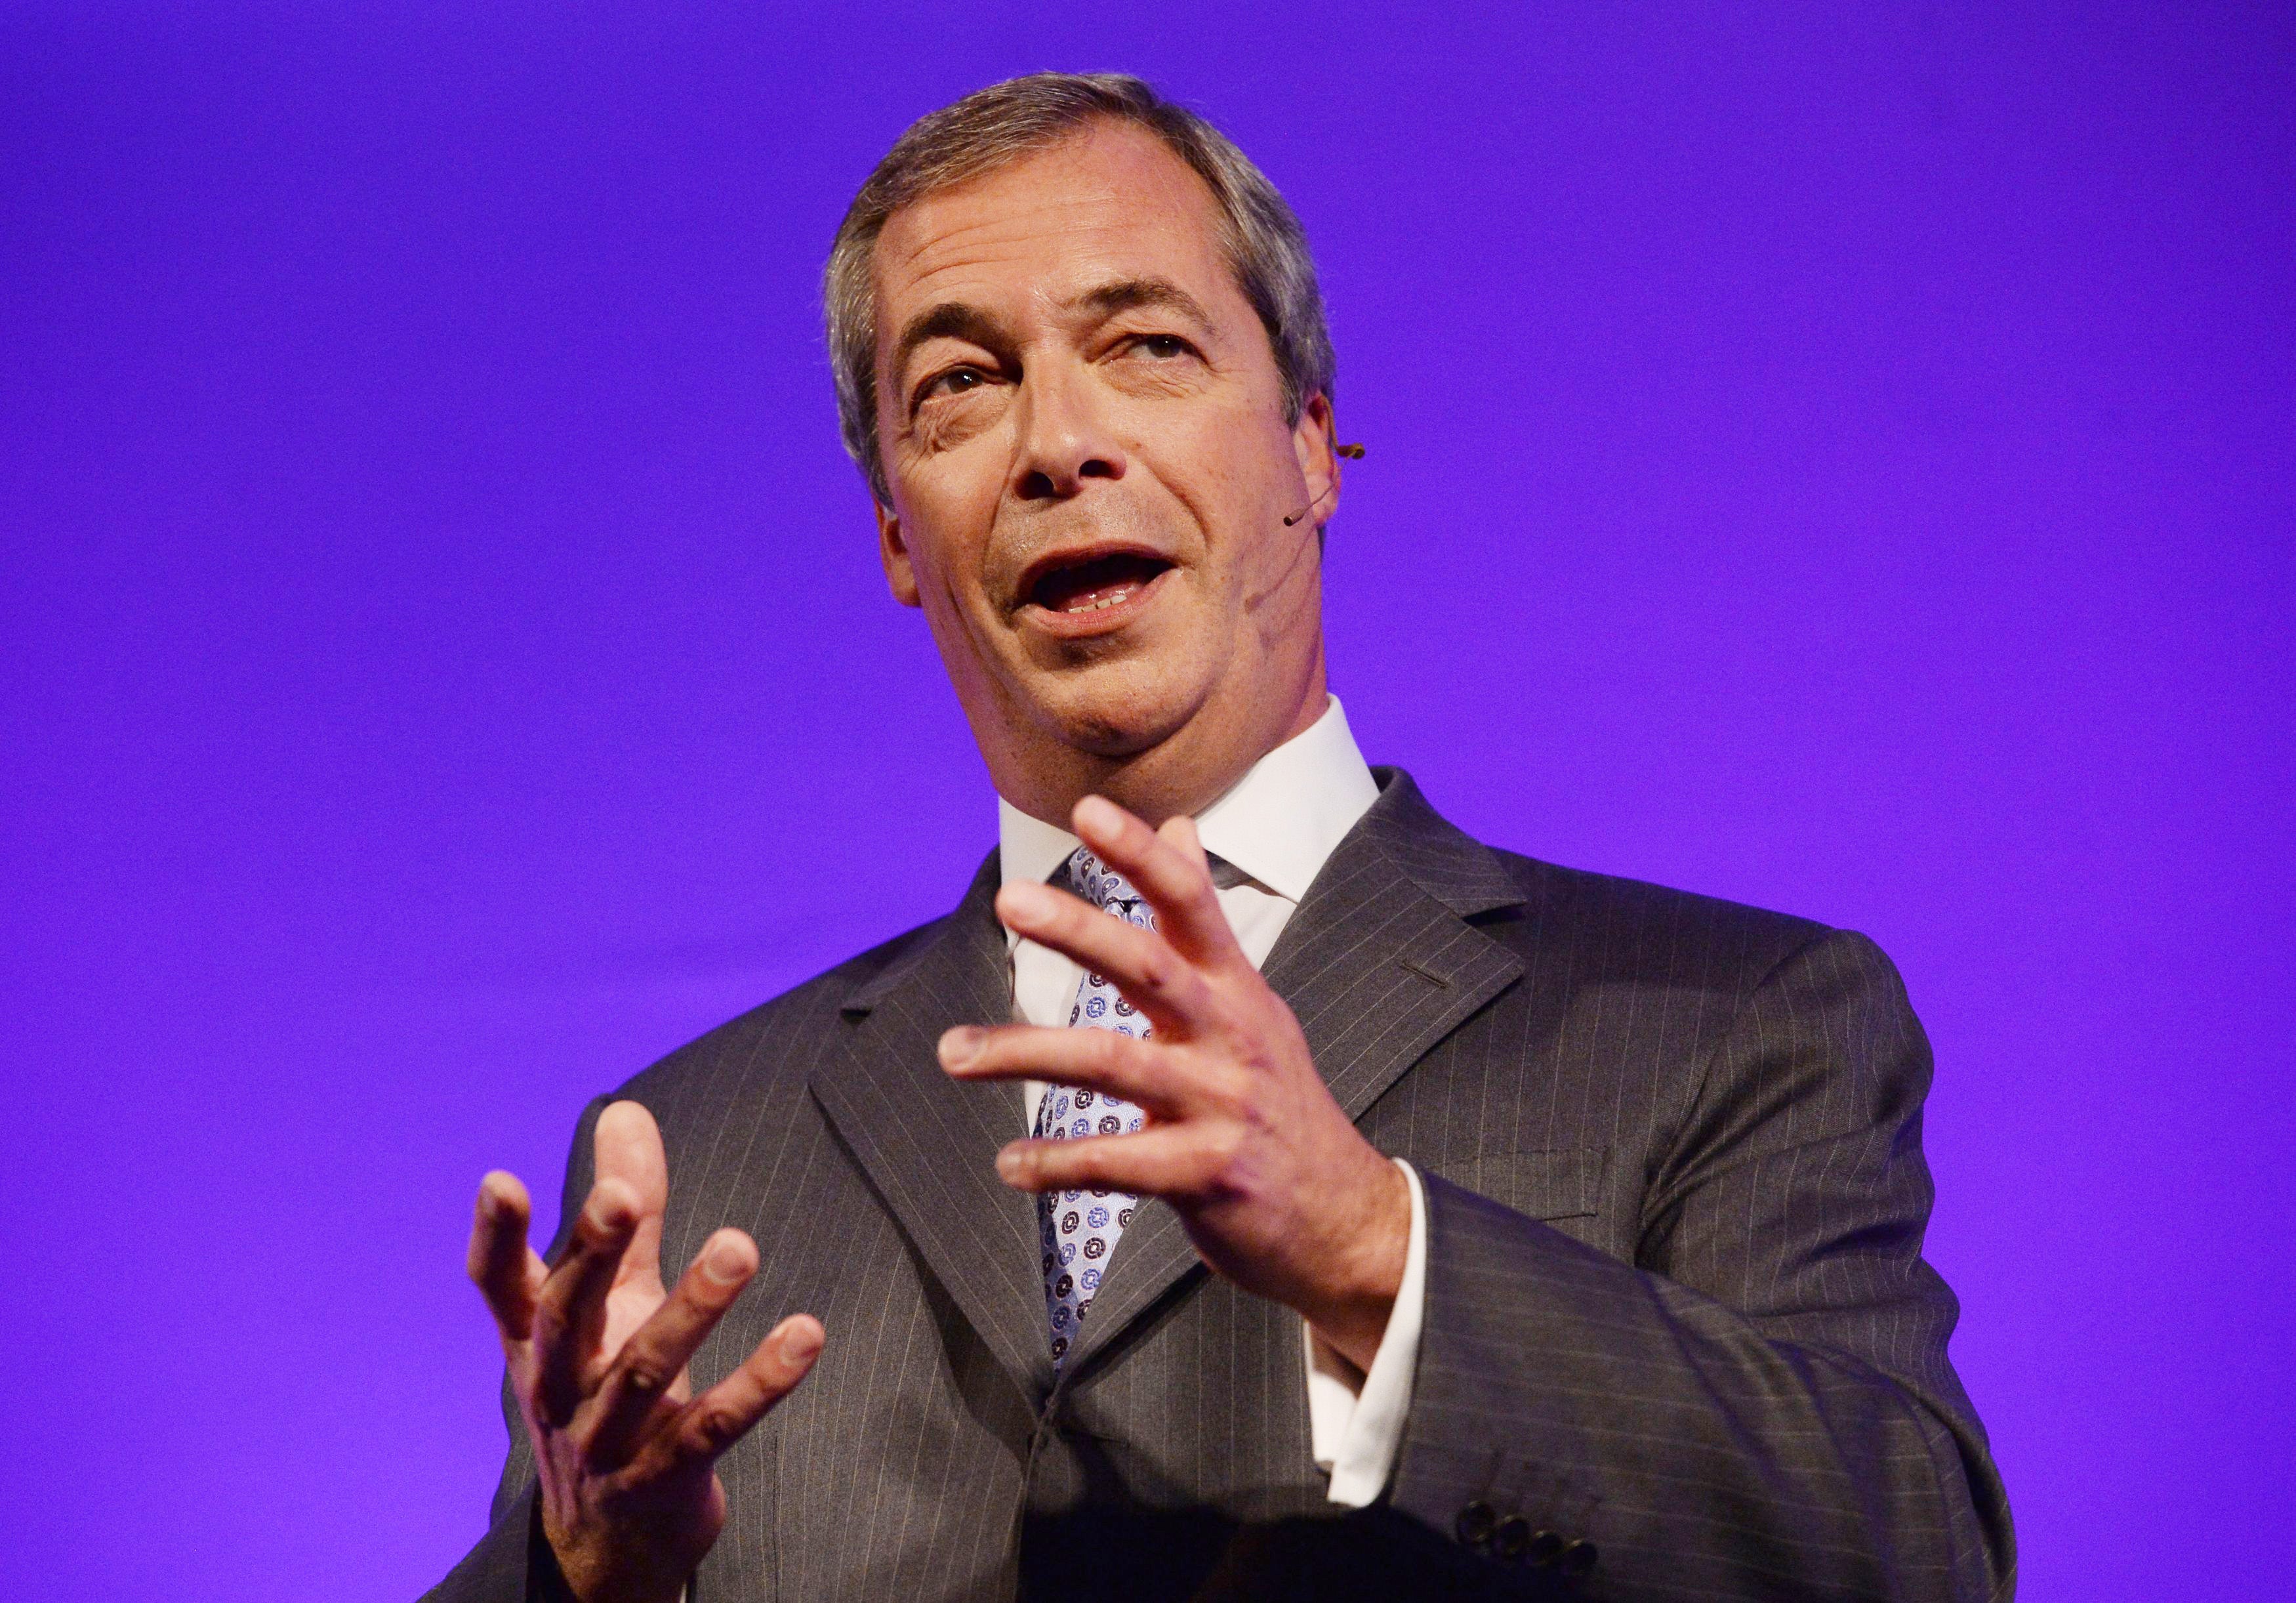 Nigel Farage makes his keynote speech at the Ukip party conference in Doncaster